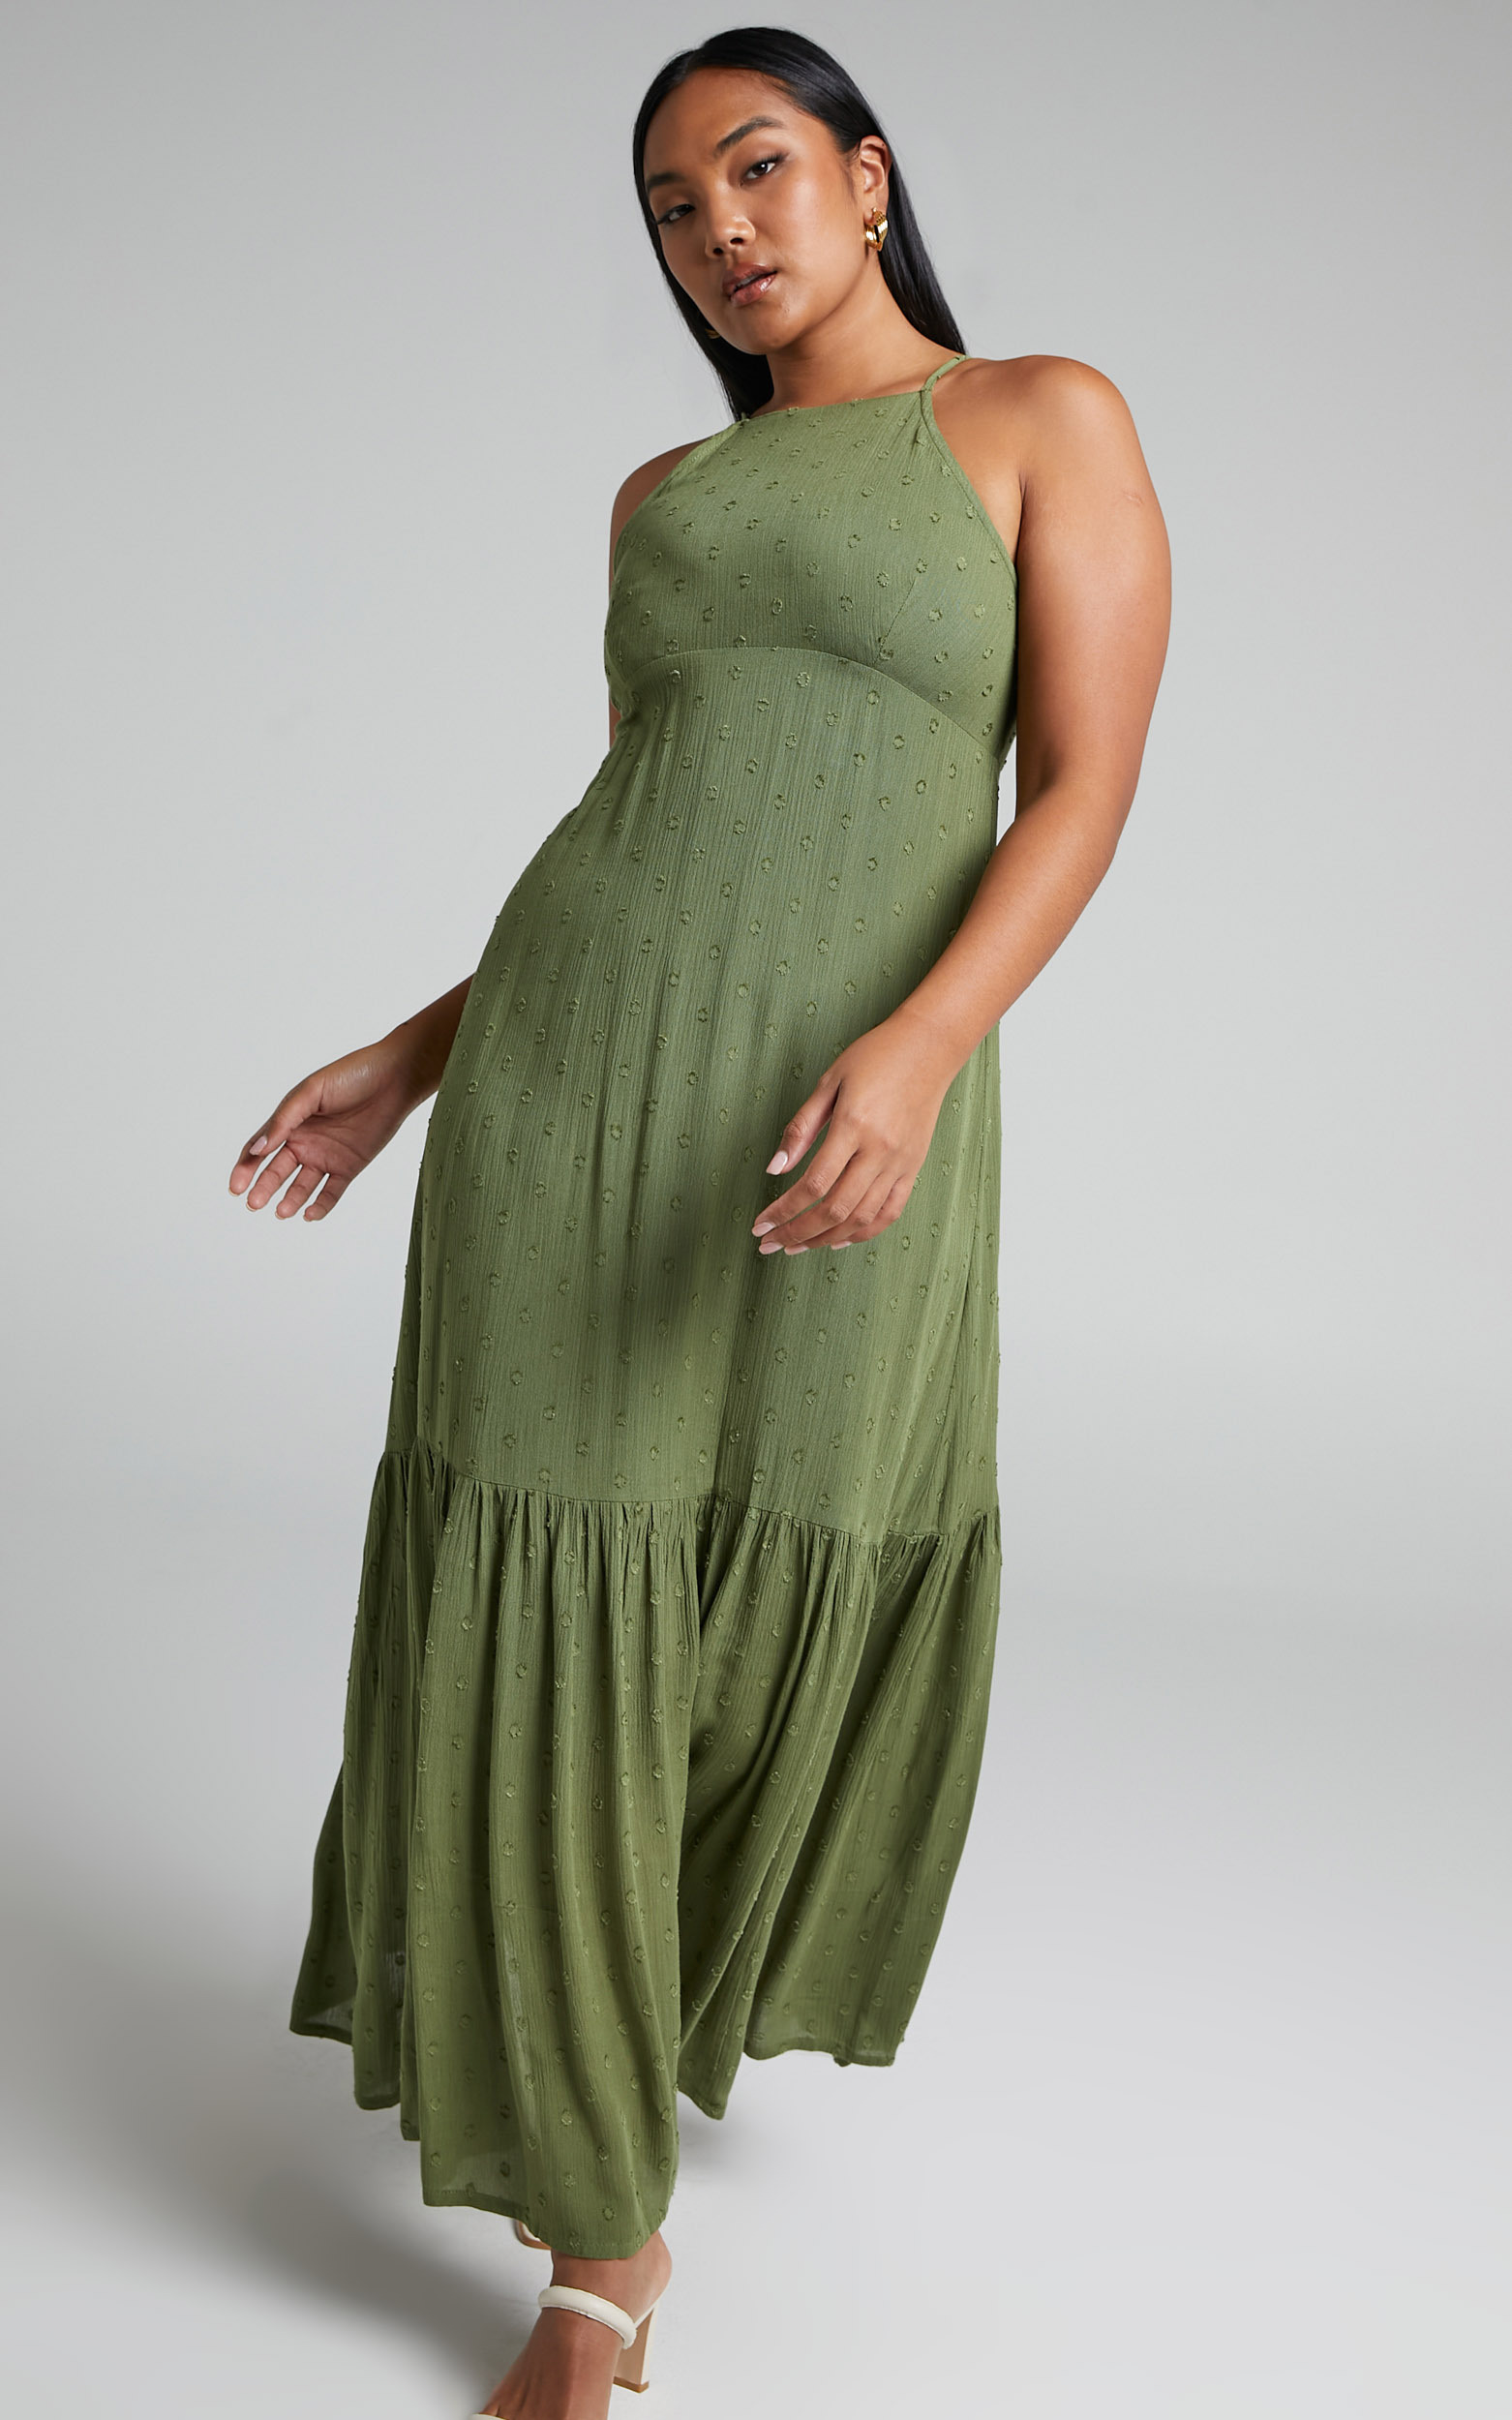 Cariele Strappy Tiered Dotted Maxi Dress in Olive - 06, GRN1, hi-res image number null